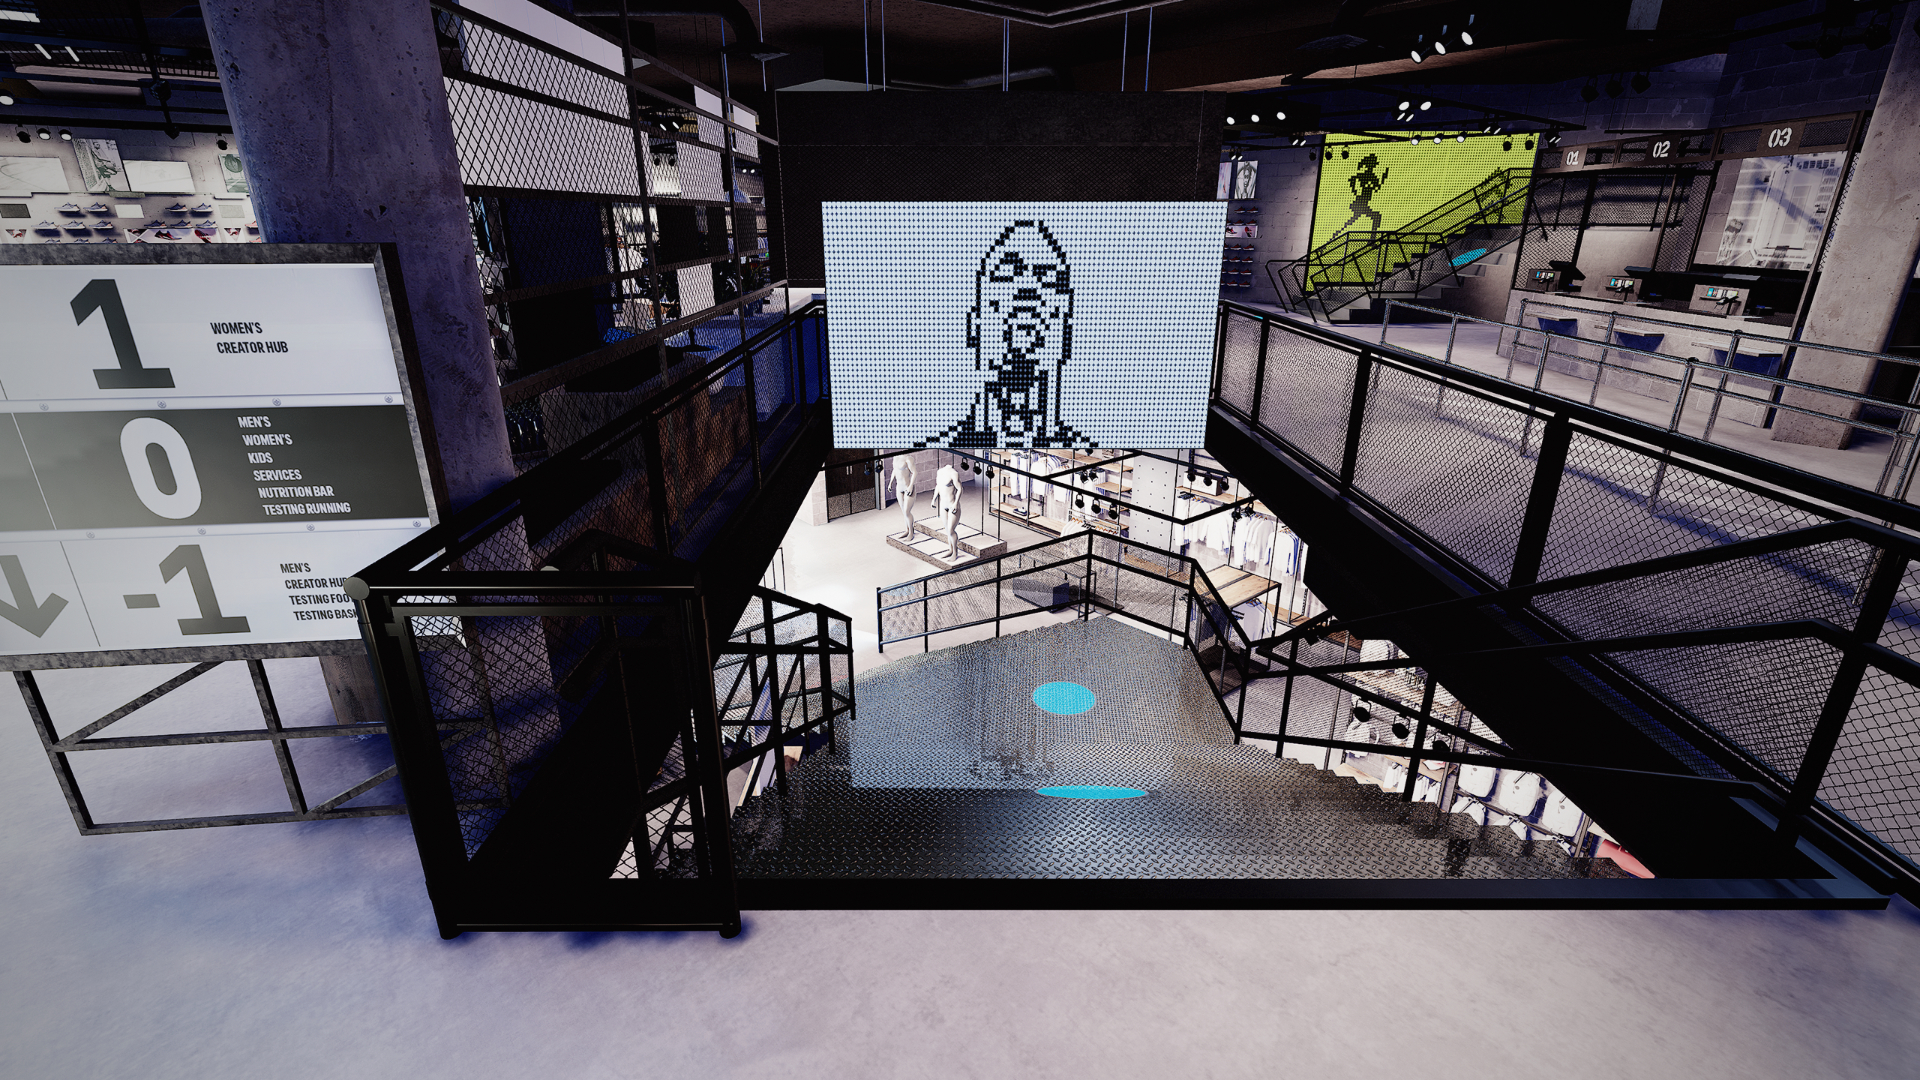 adidas Paris Store - ONE | Game Art Outsourcing